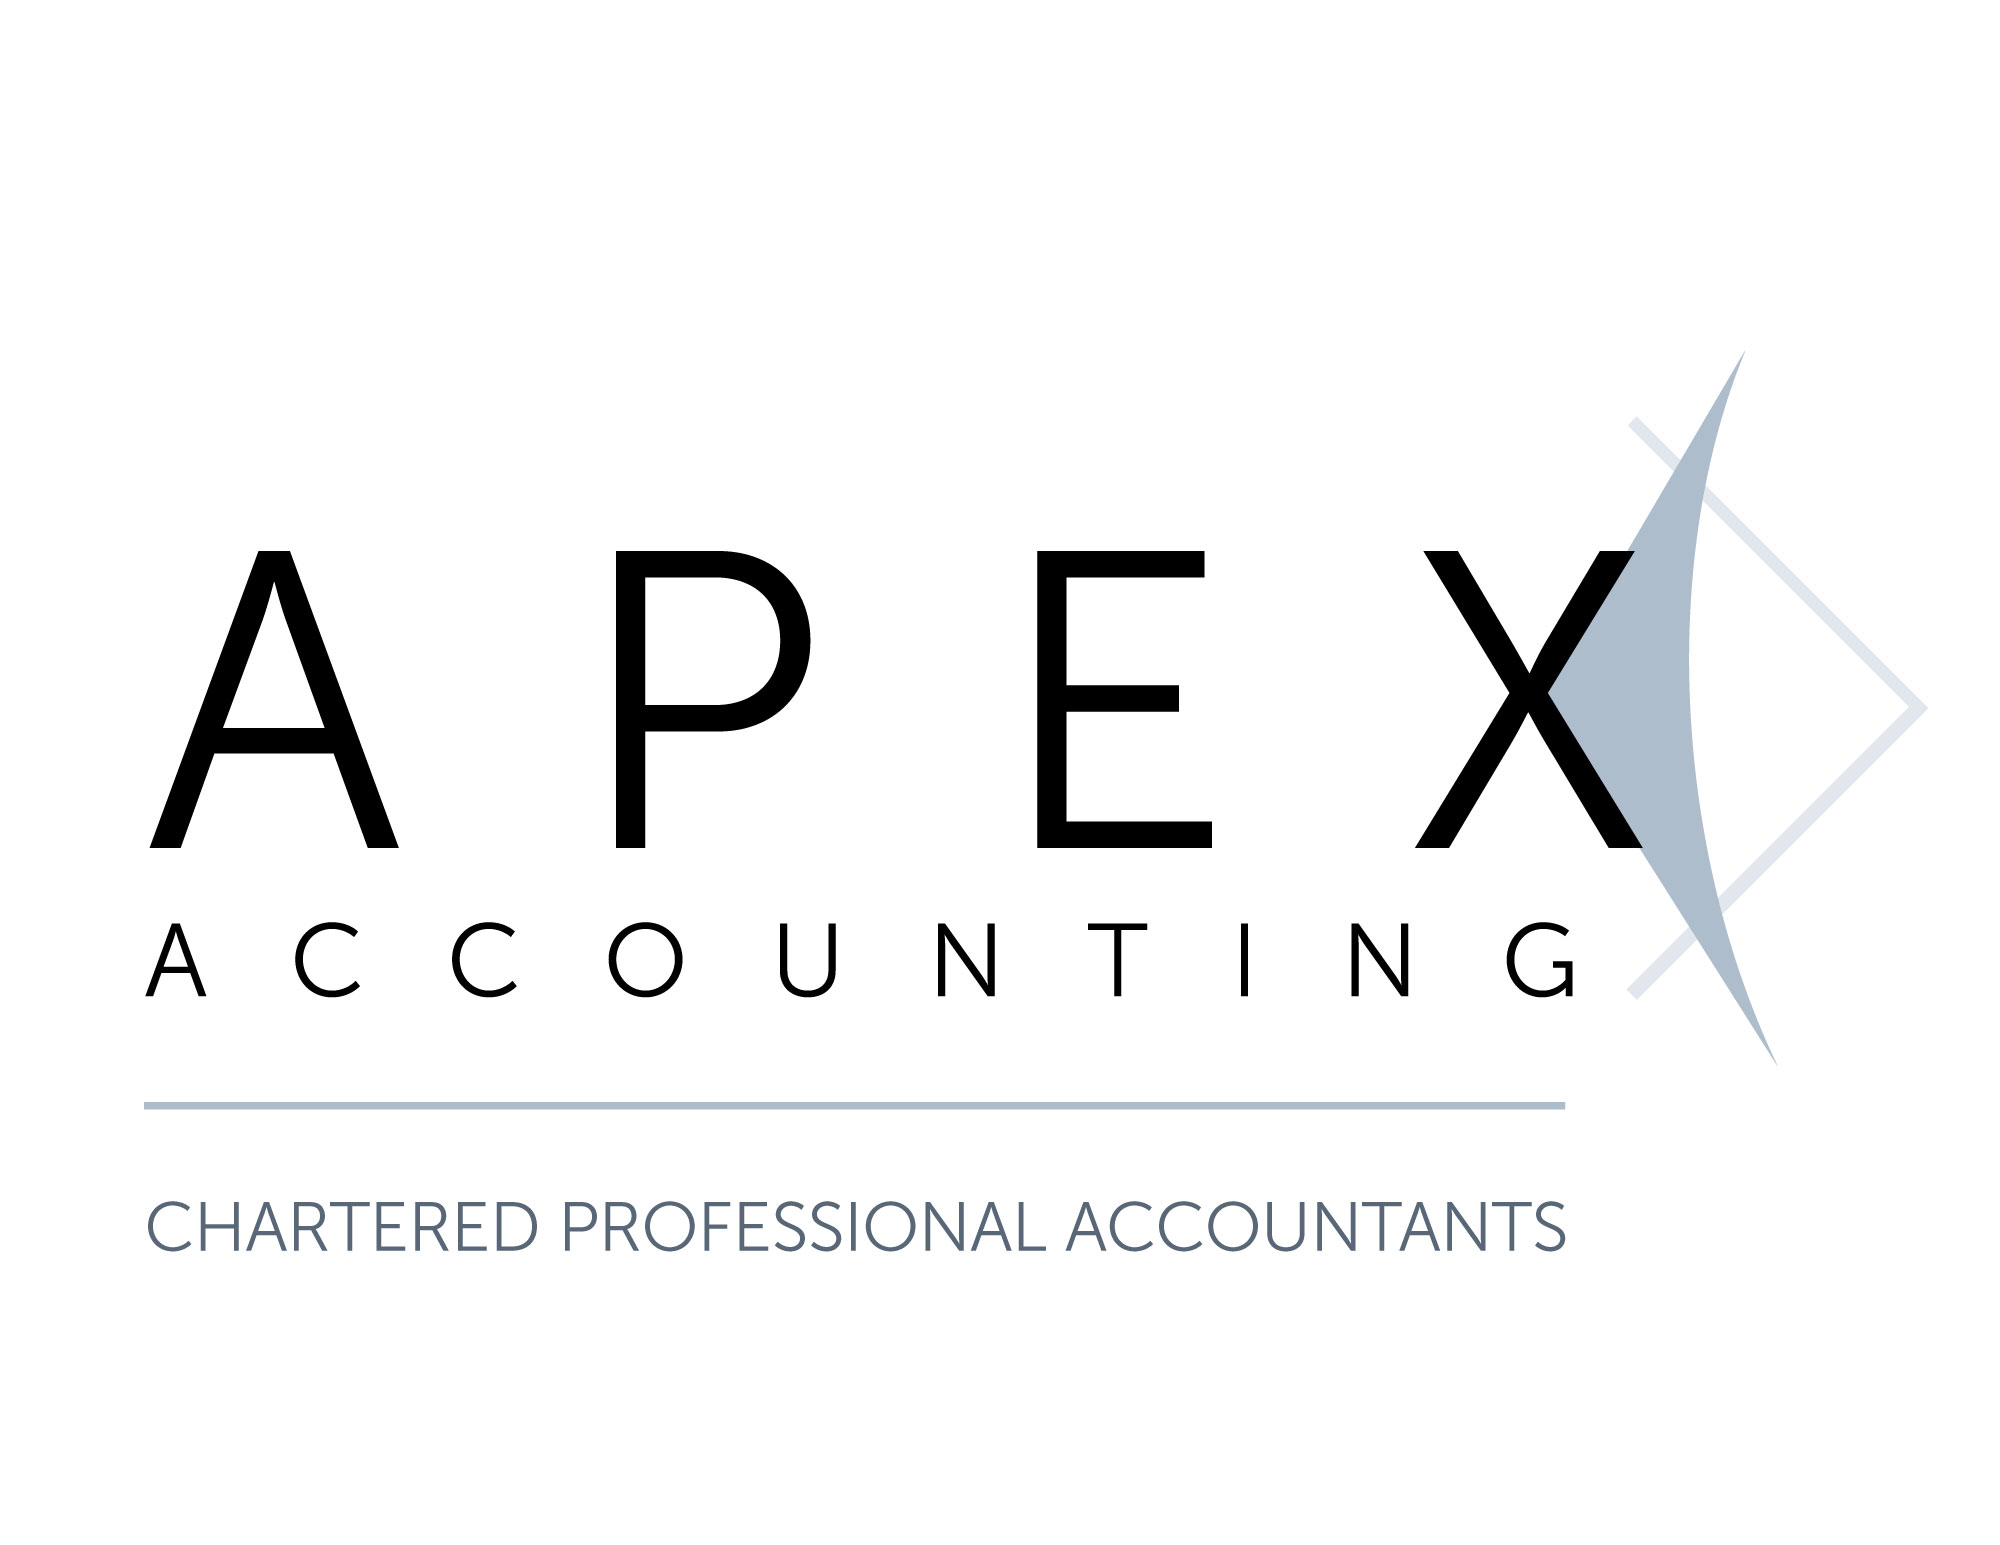 APEX ACCOUNTING